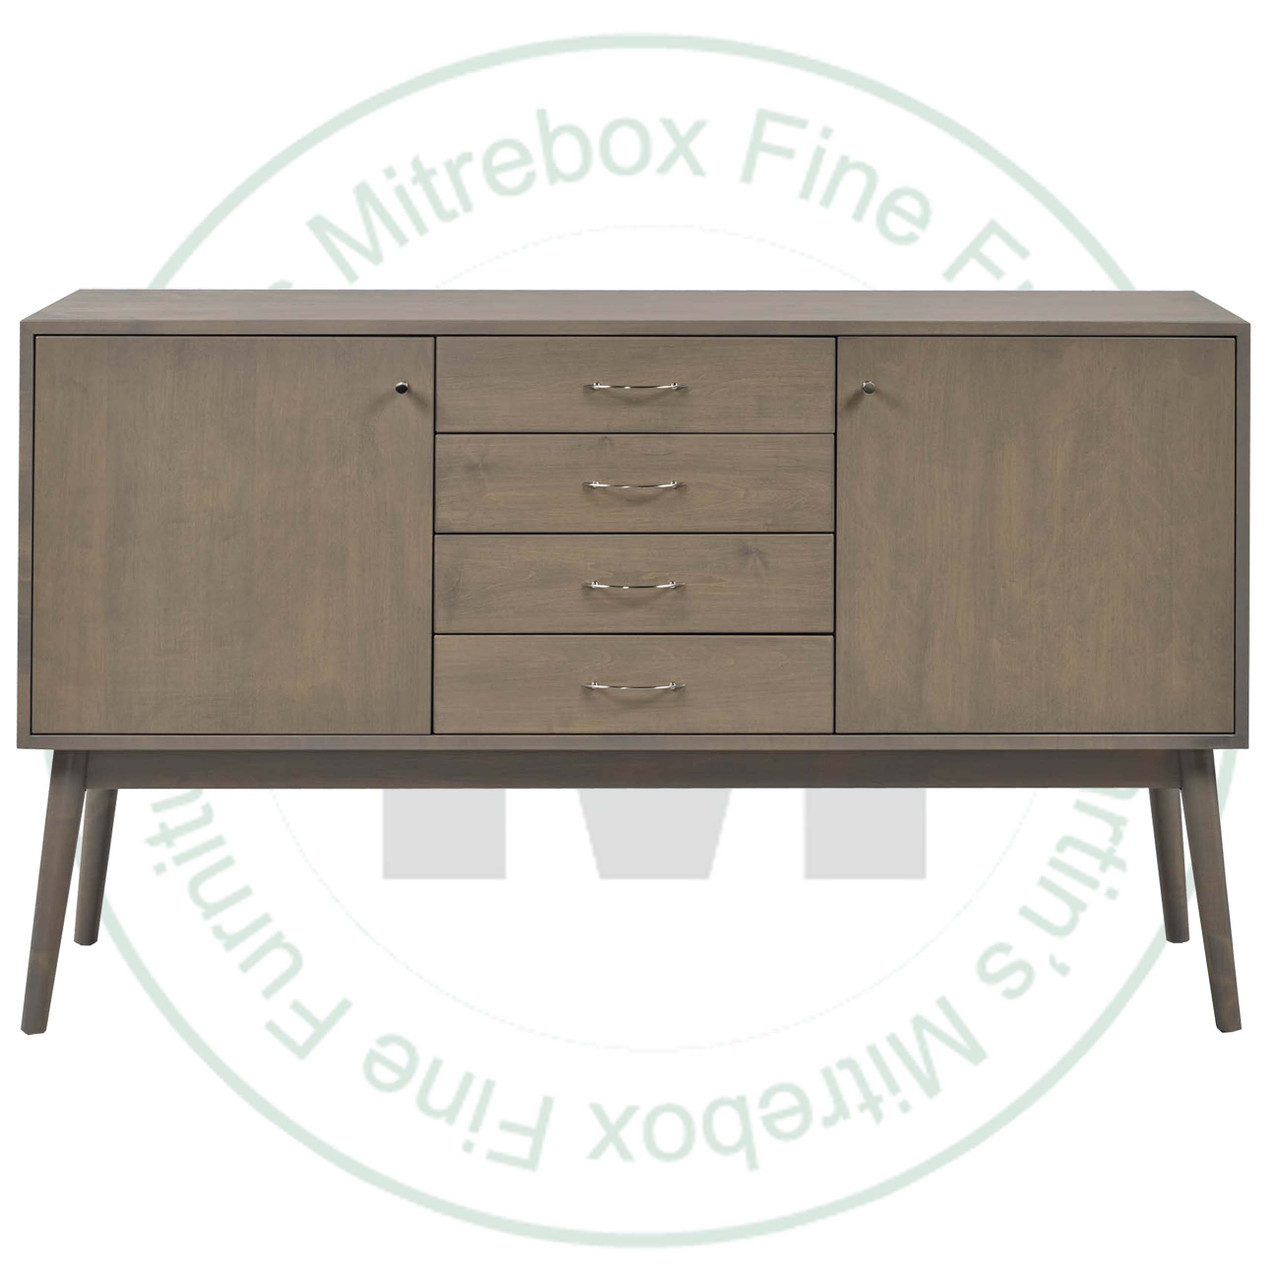 Wormy Maple Skalo Sideboard 18''D x 72''W x 36''H With 2 Doors and 4 Drawers